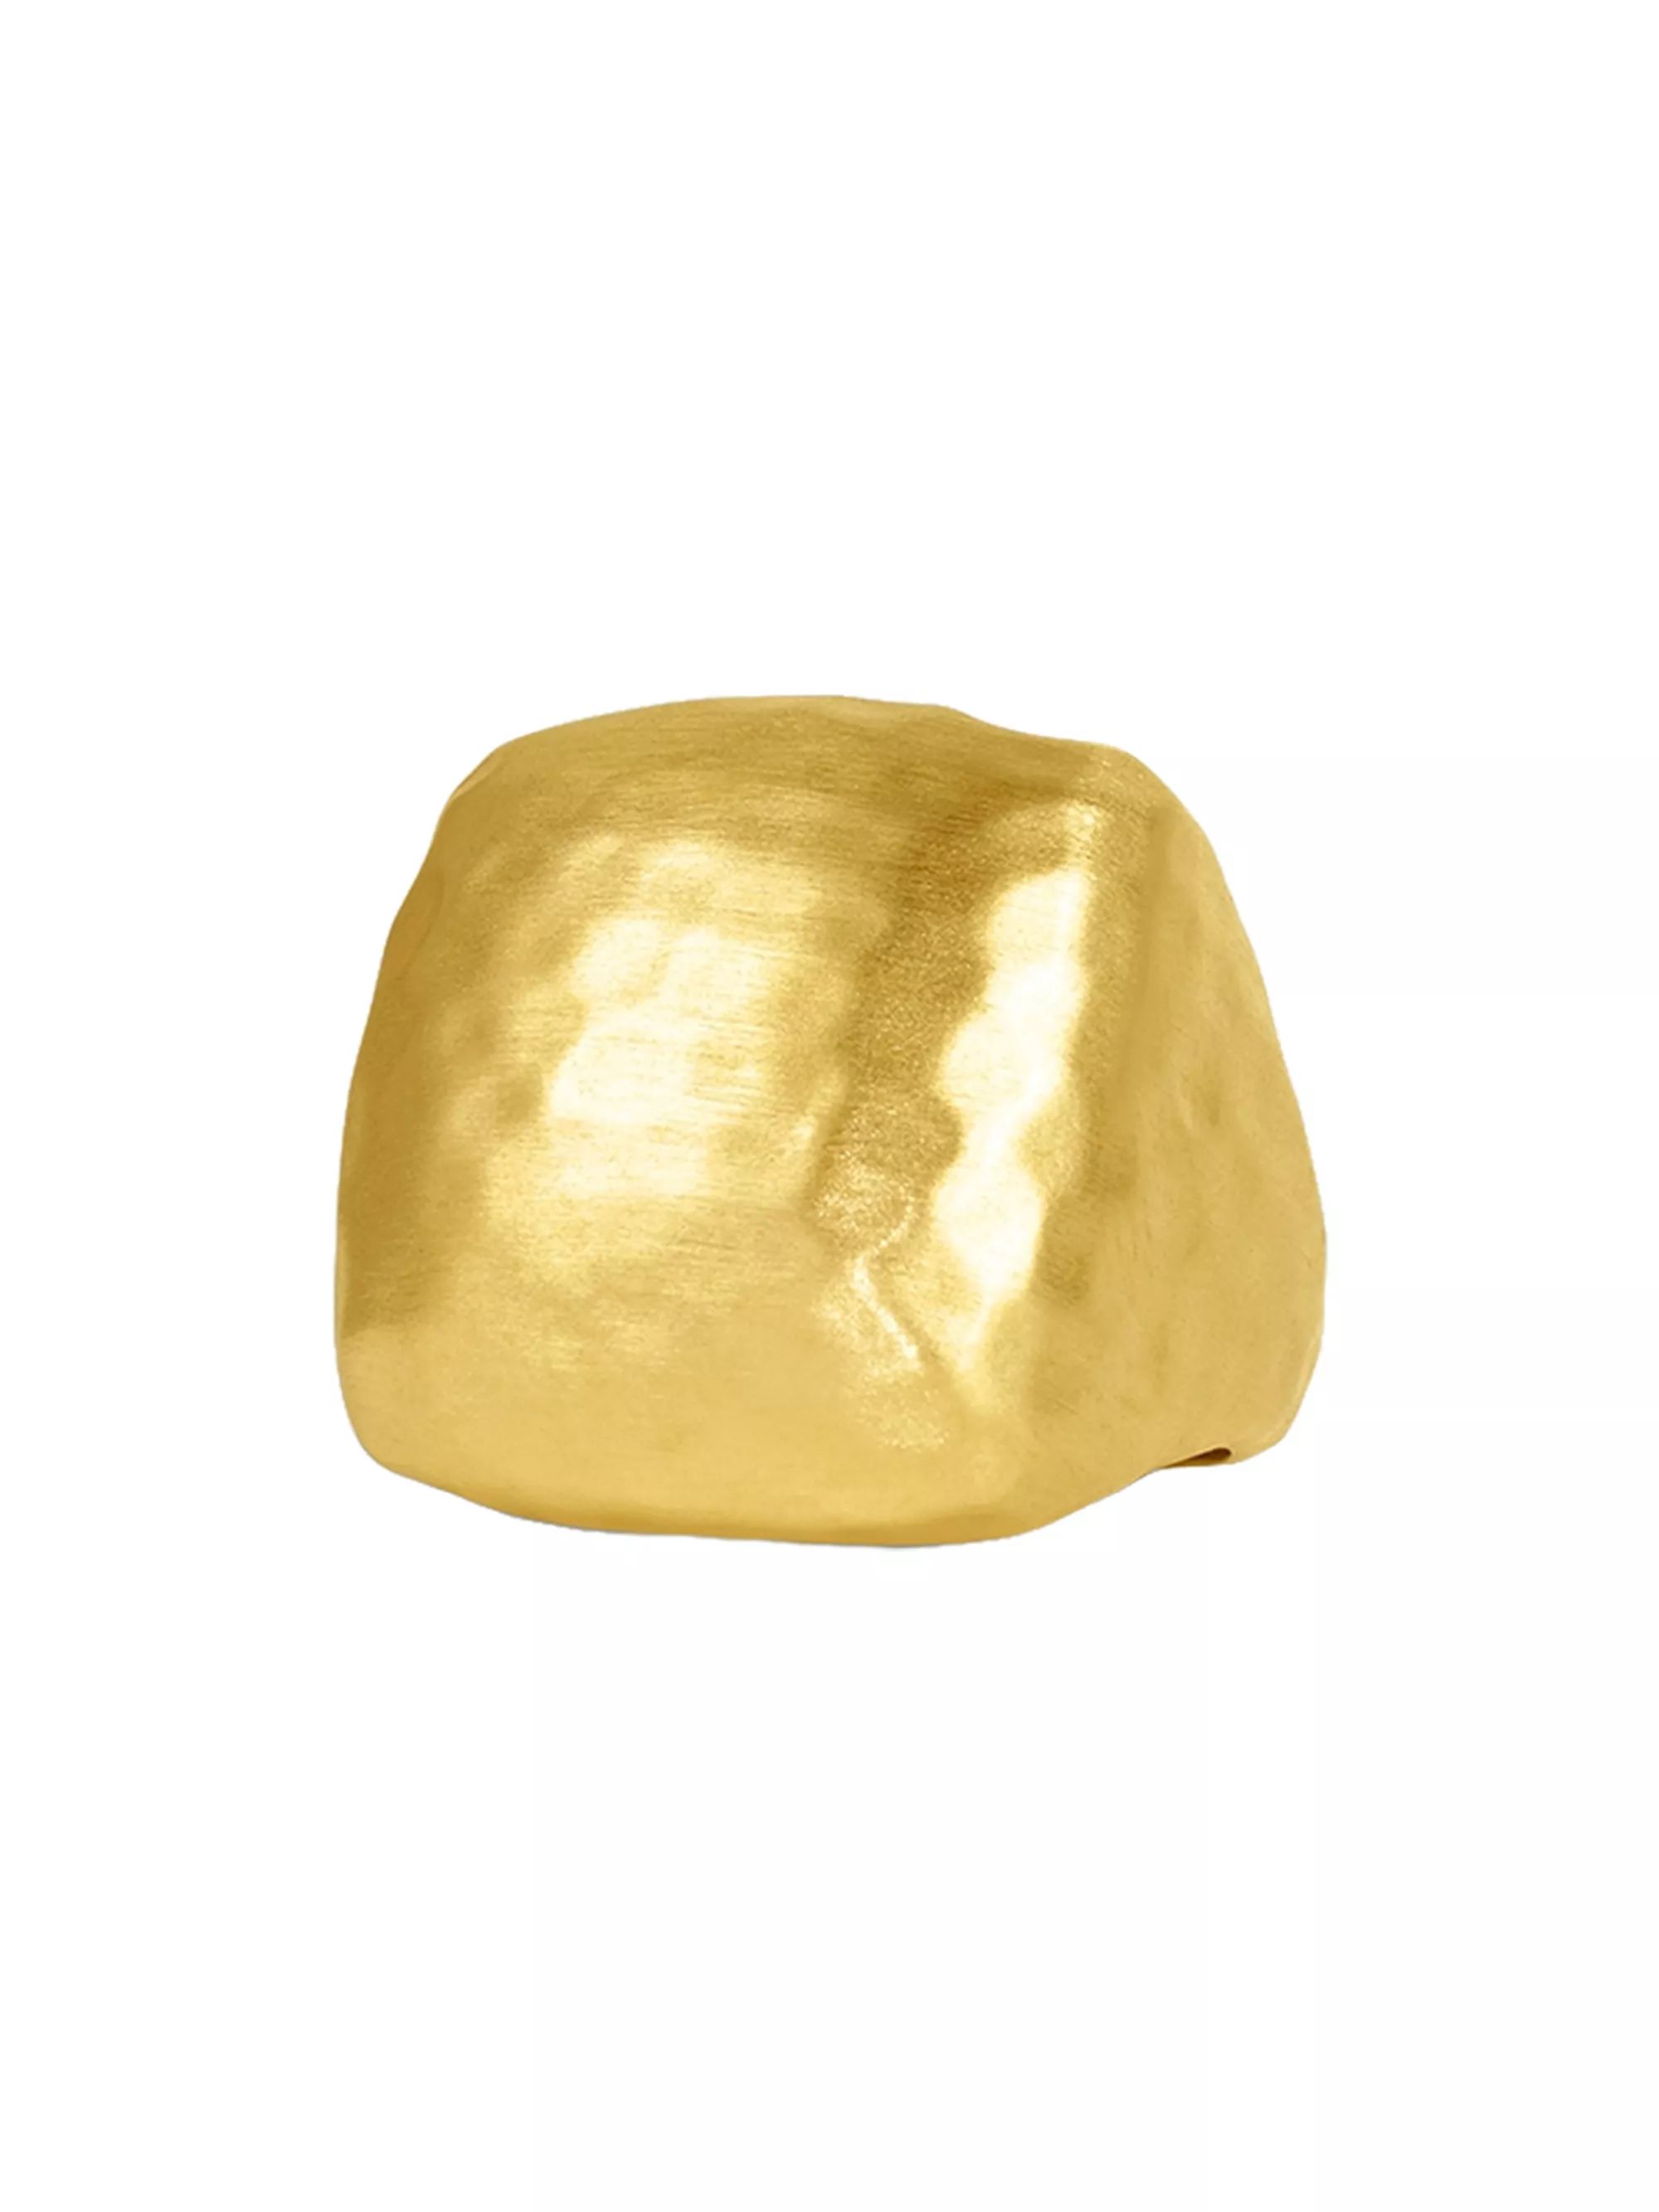 Nomad Brushed 22K Gold-Plated Square Ring | Saks Fifth Avenue